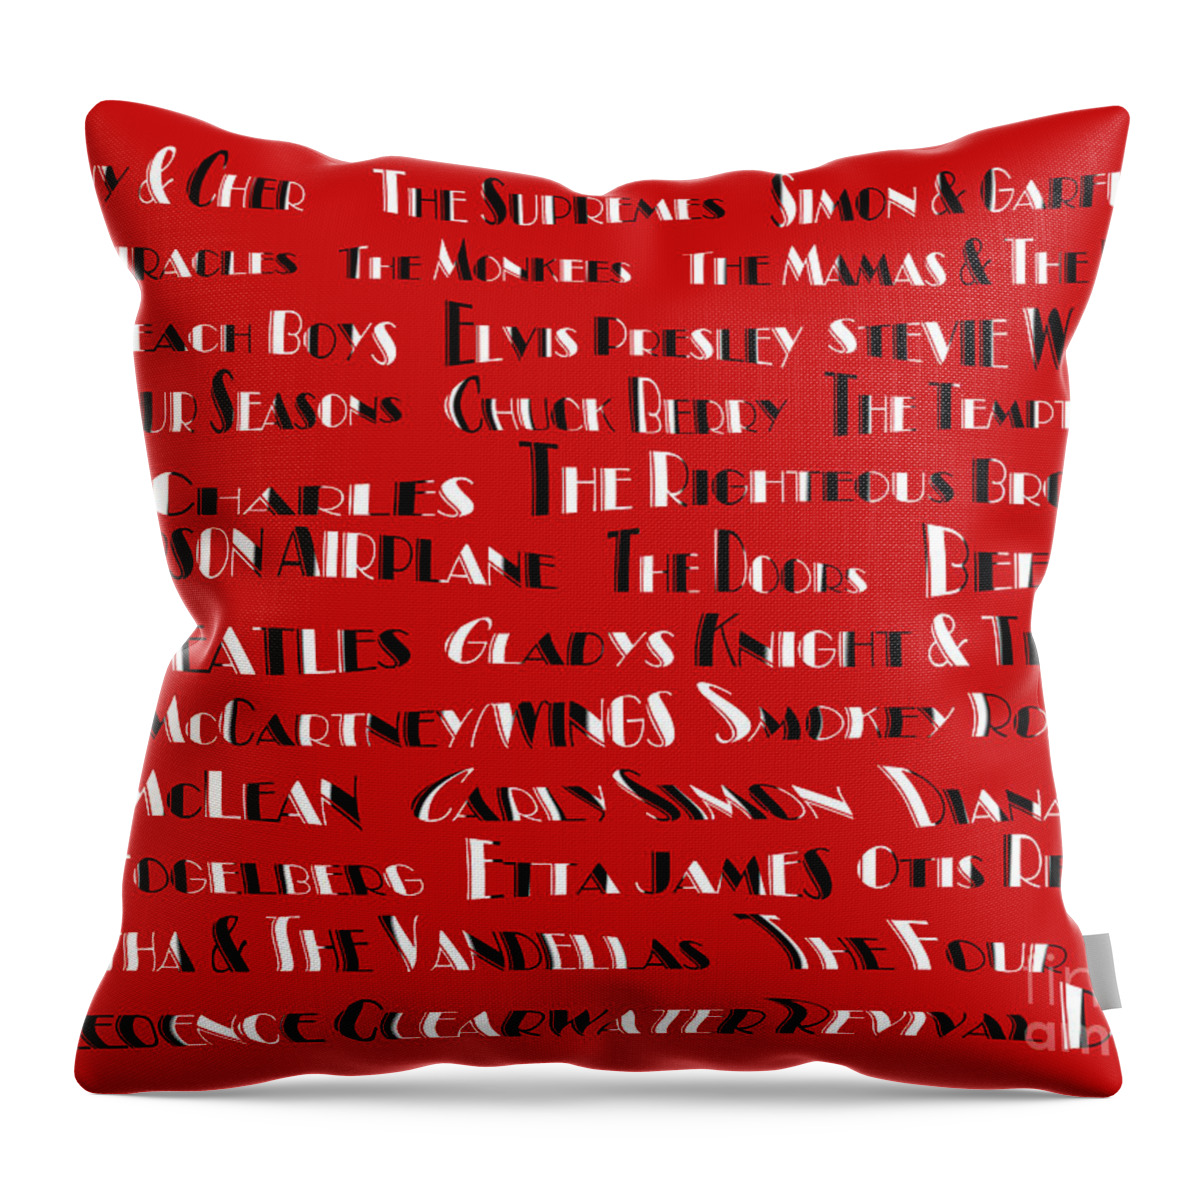 The Beatles Throw Pillow featuring the digital art The Faces Of Rock And Roll by Andee Design